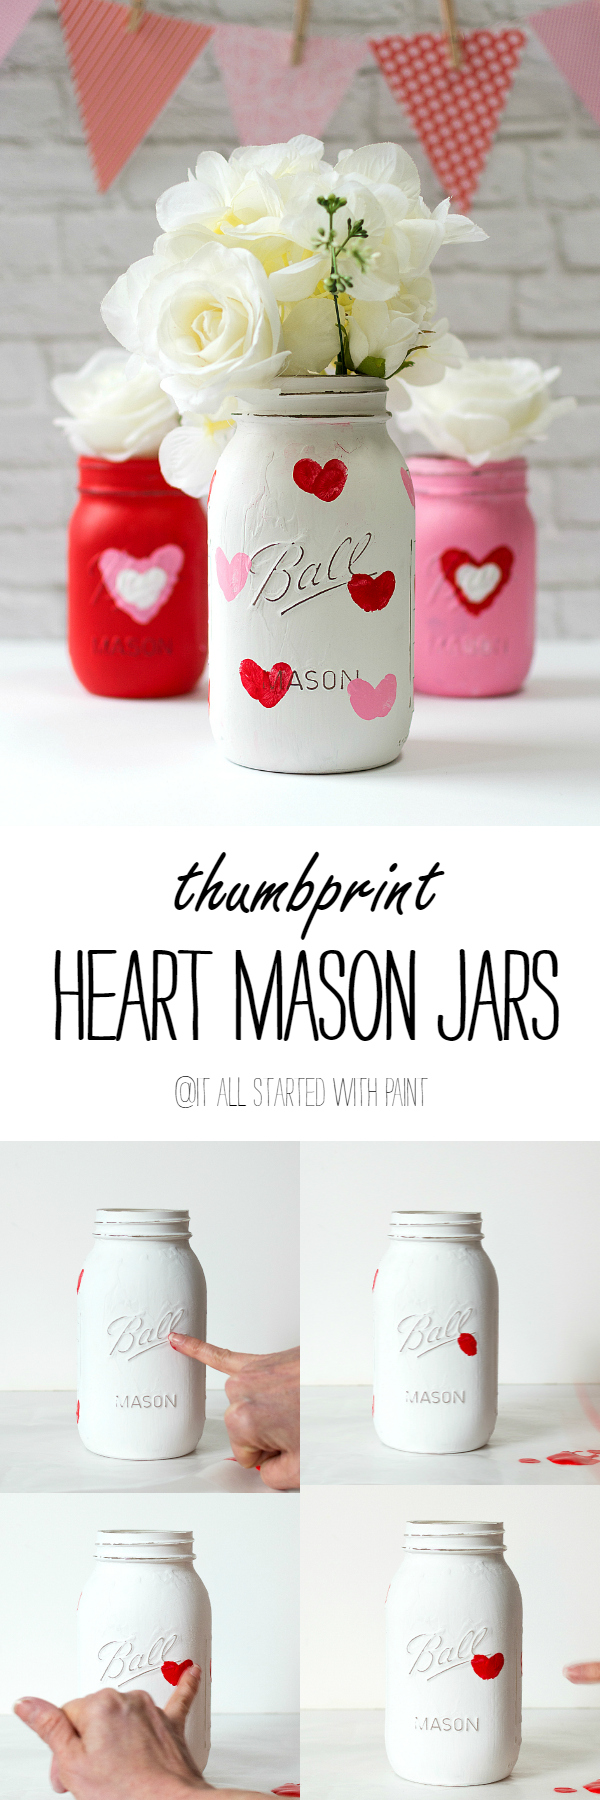 Mason Jar Craft Ideas for Valentines Day - Painted Distressed Mason Jars with Thumbprint Hearts